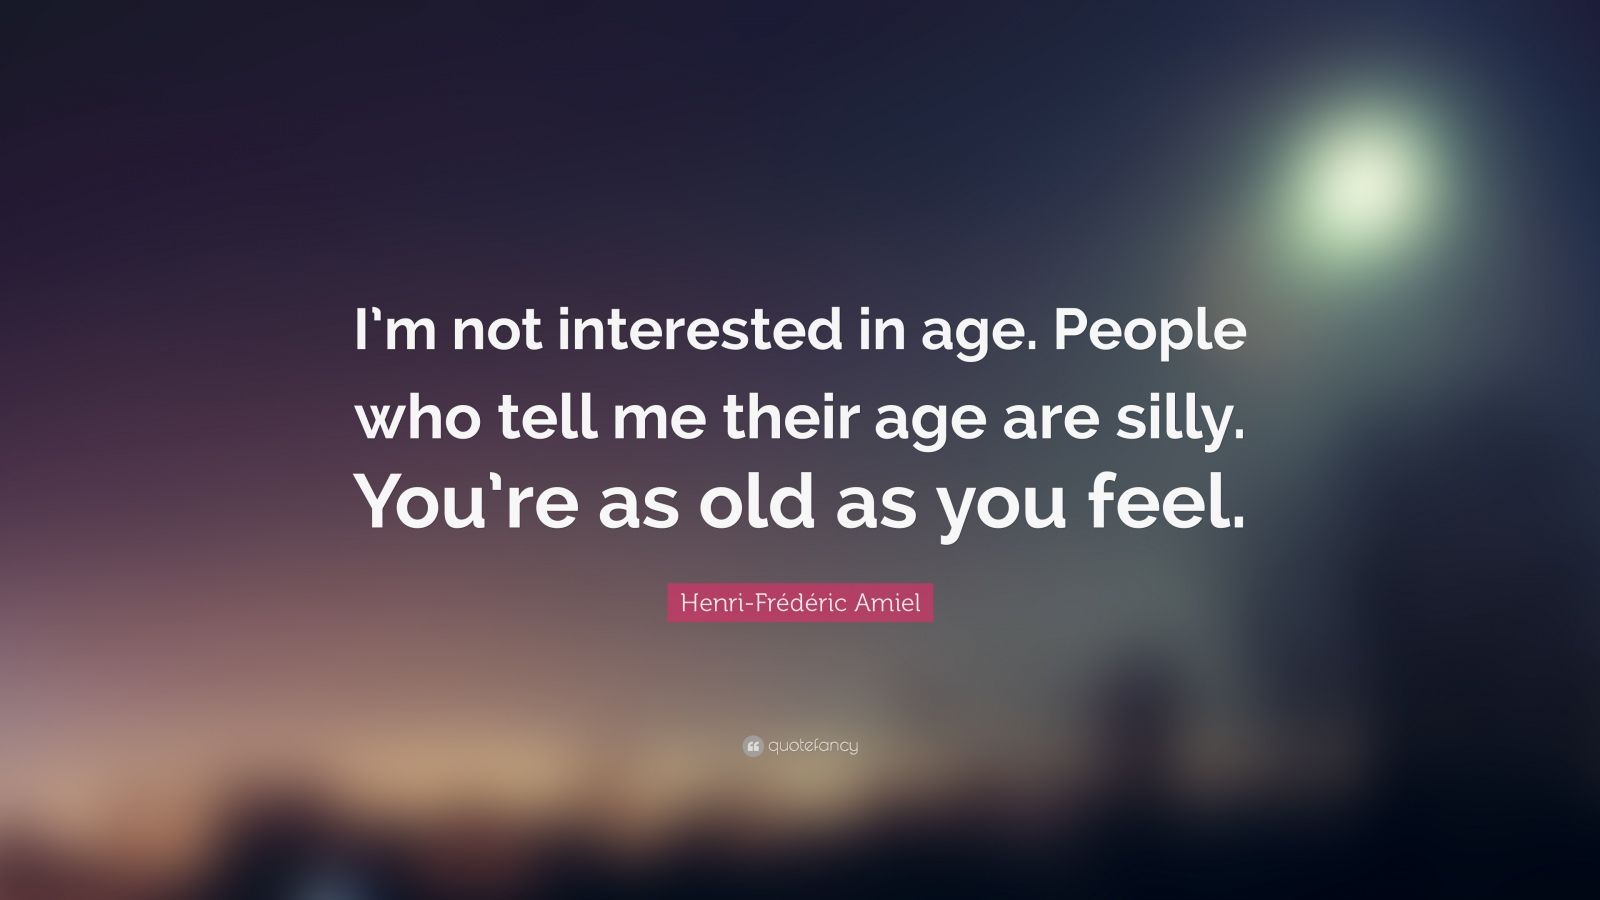 HenriFrédéric Amiel Quote “I’m not interested in age